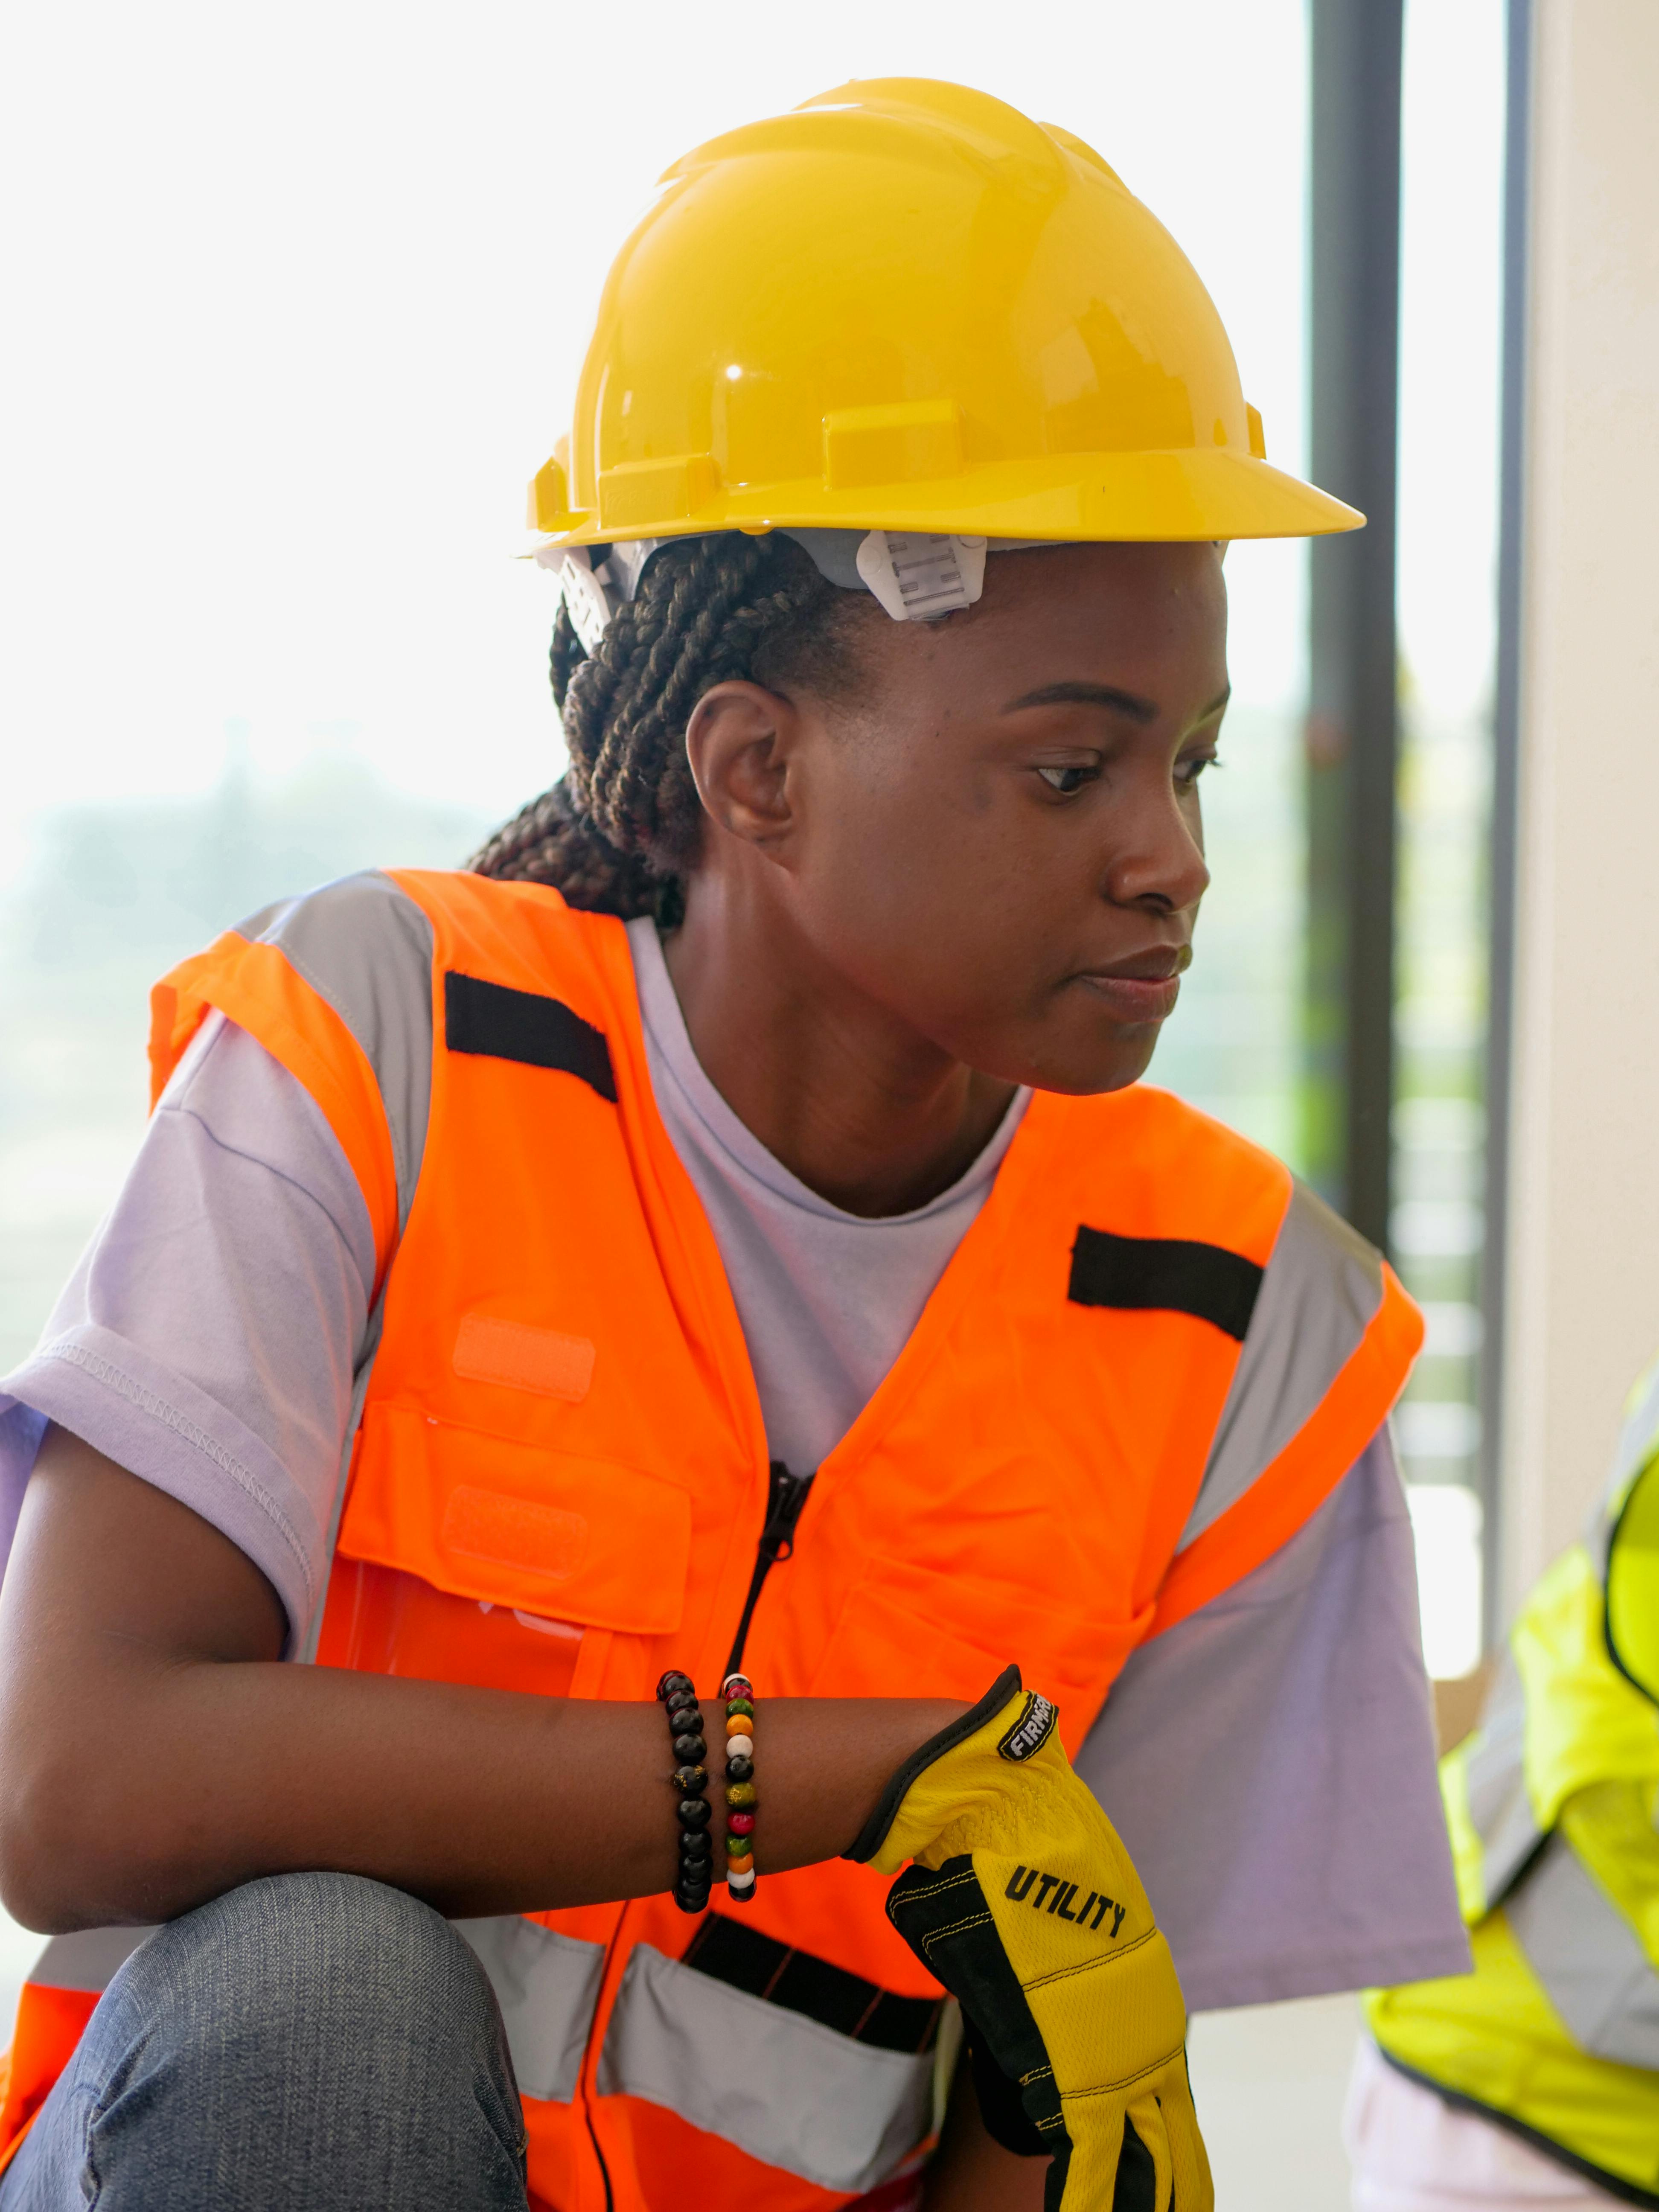 a woman wearing a yellow hard hat and orange vest